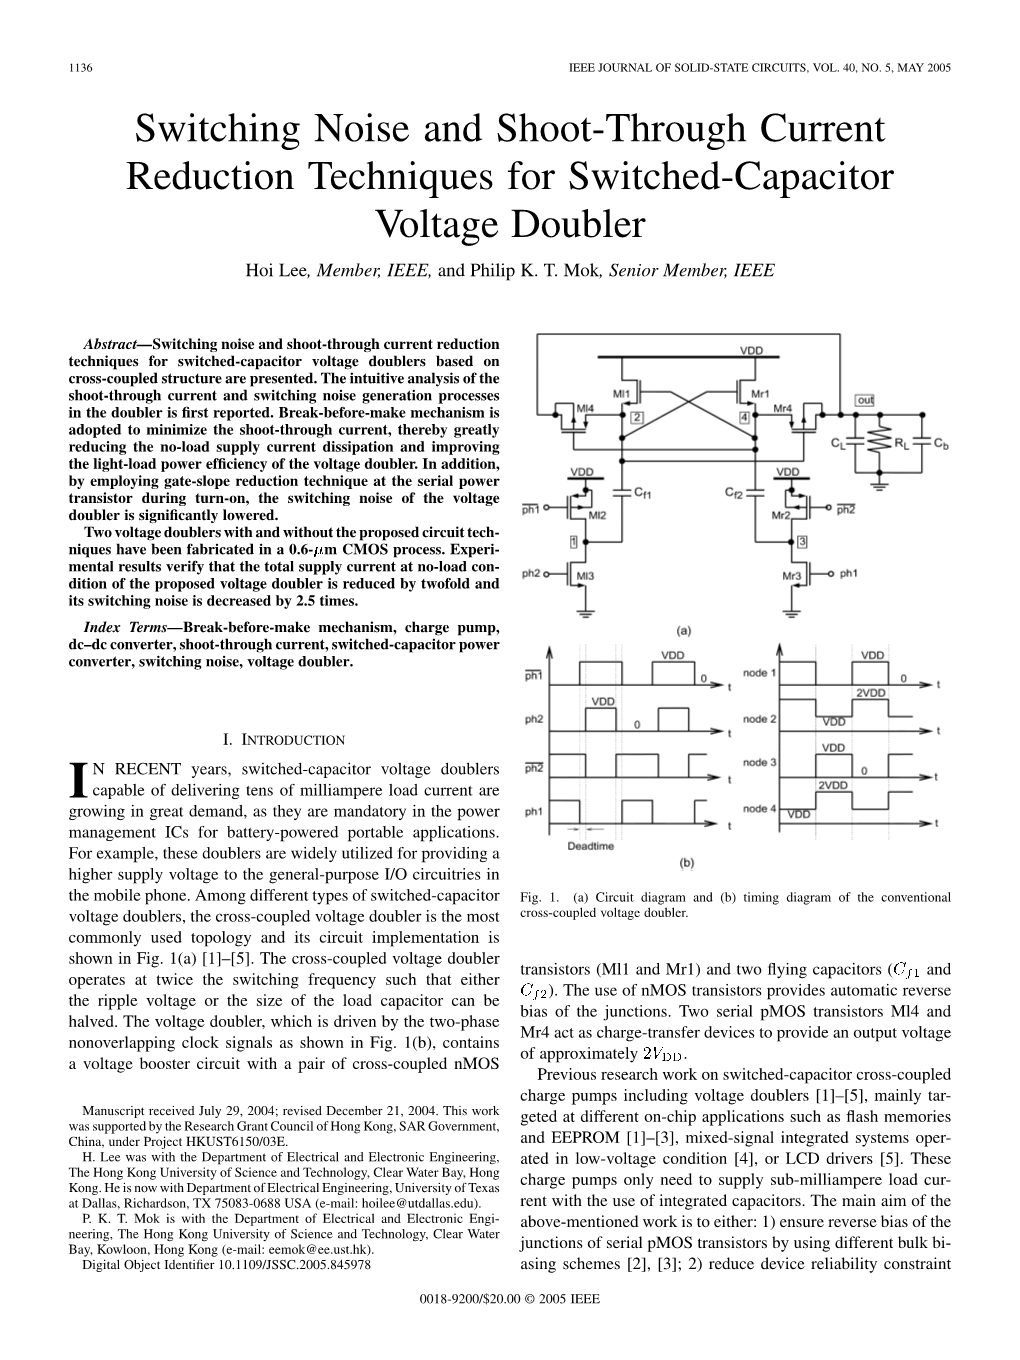 Switching Noise and Shoot-Through Current Reduction Techniques for Switched-Capacitor Voltage Doubler Hoi Lee, Member, IEEE, and Philip K